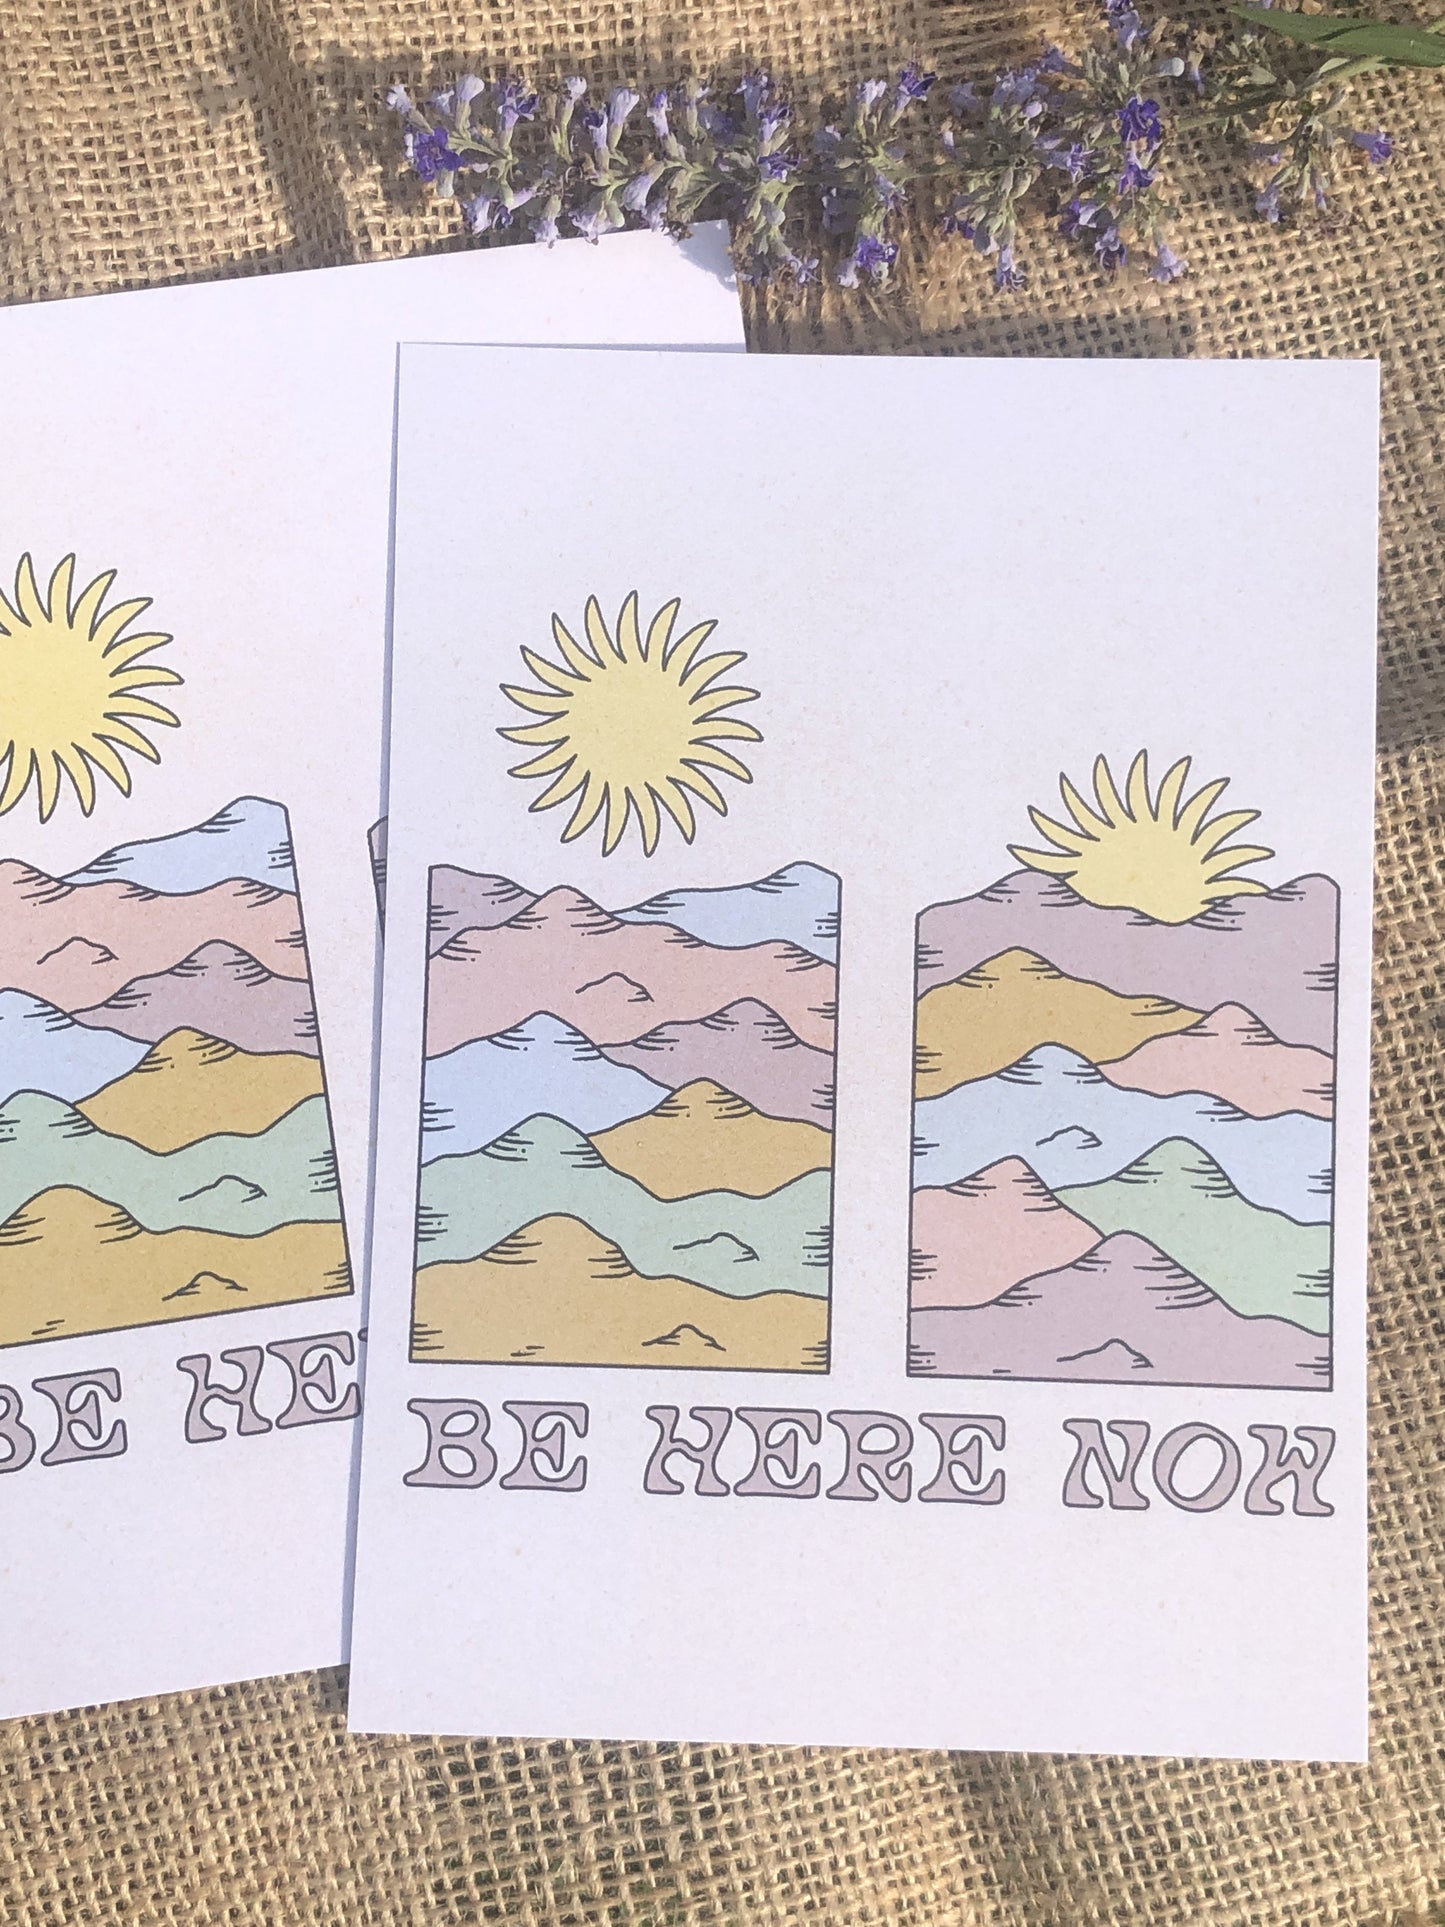 Be Here Now – Print